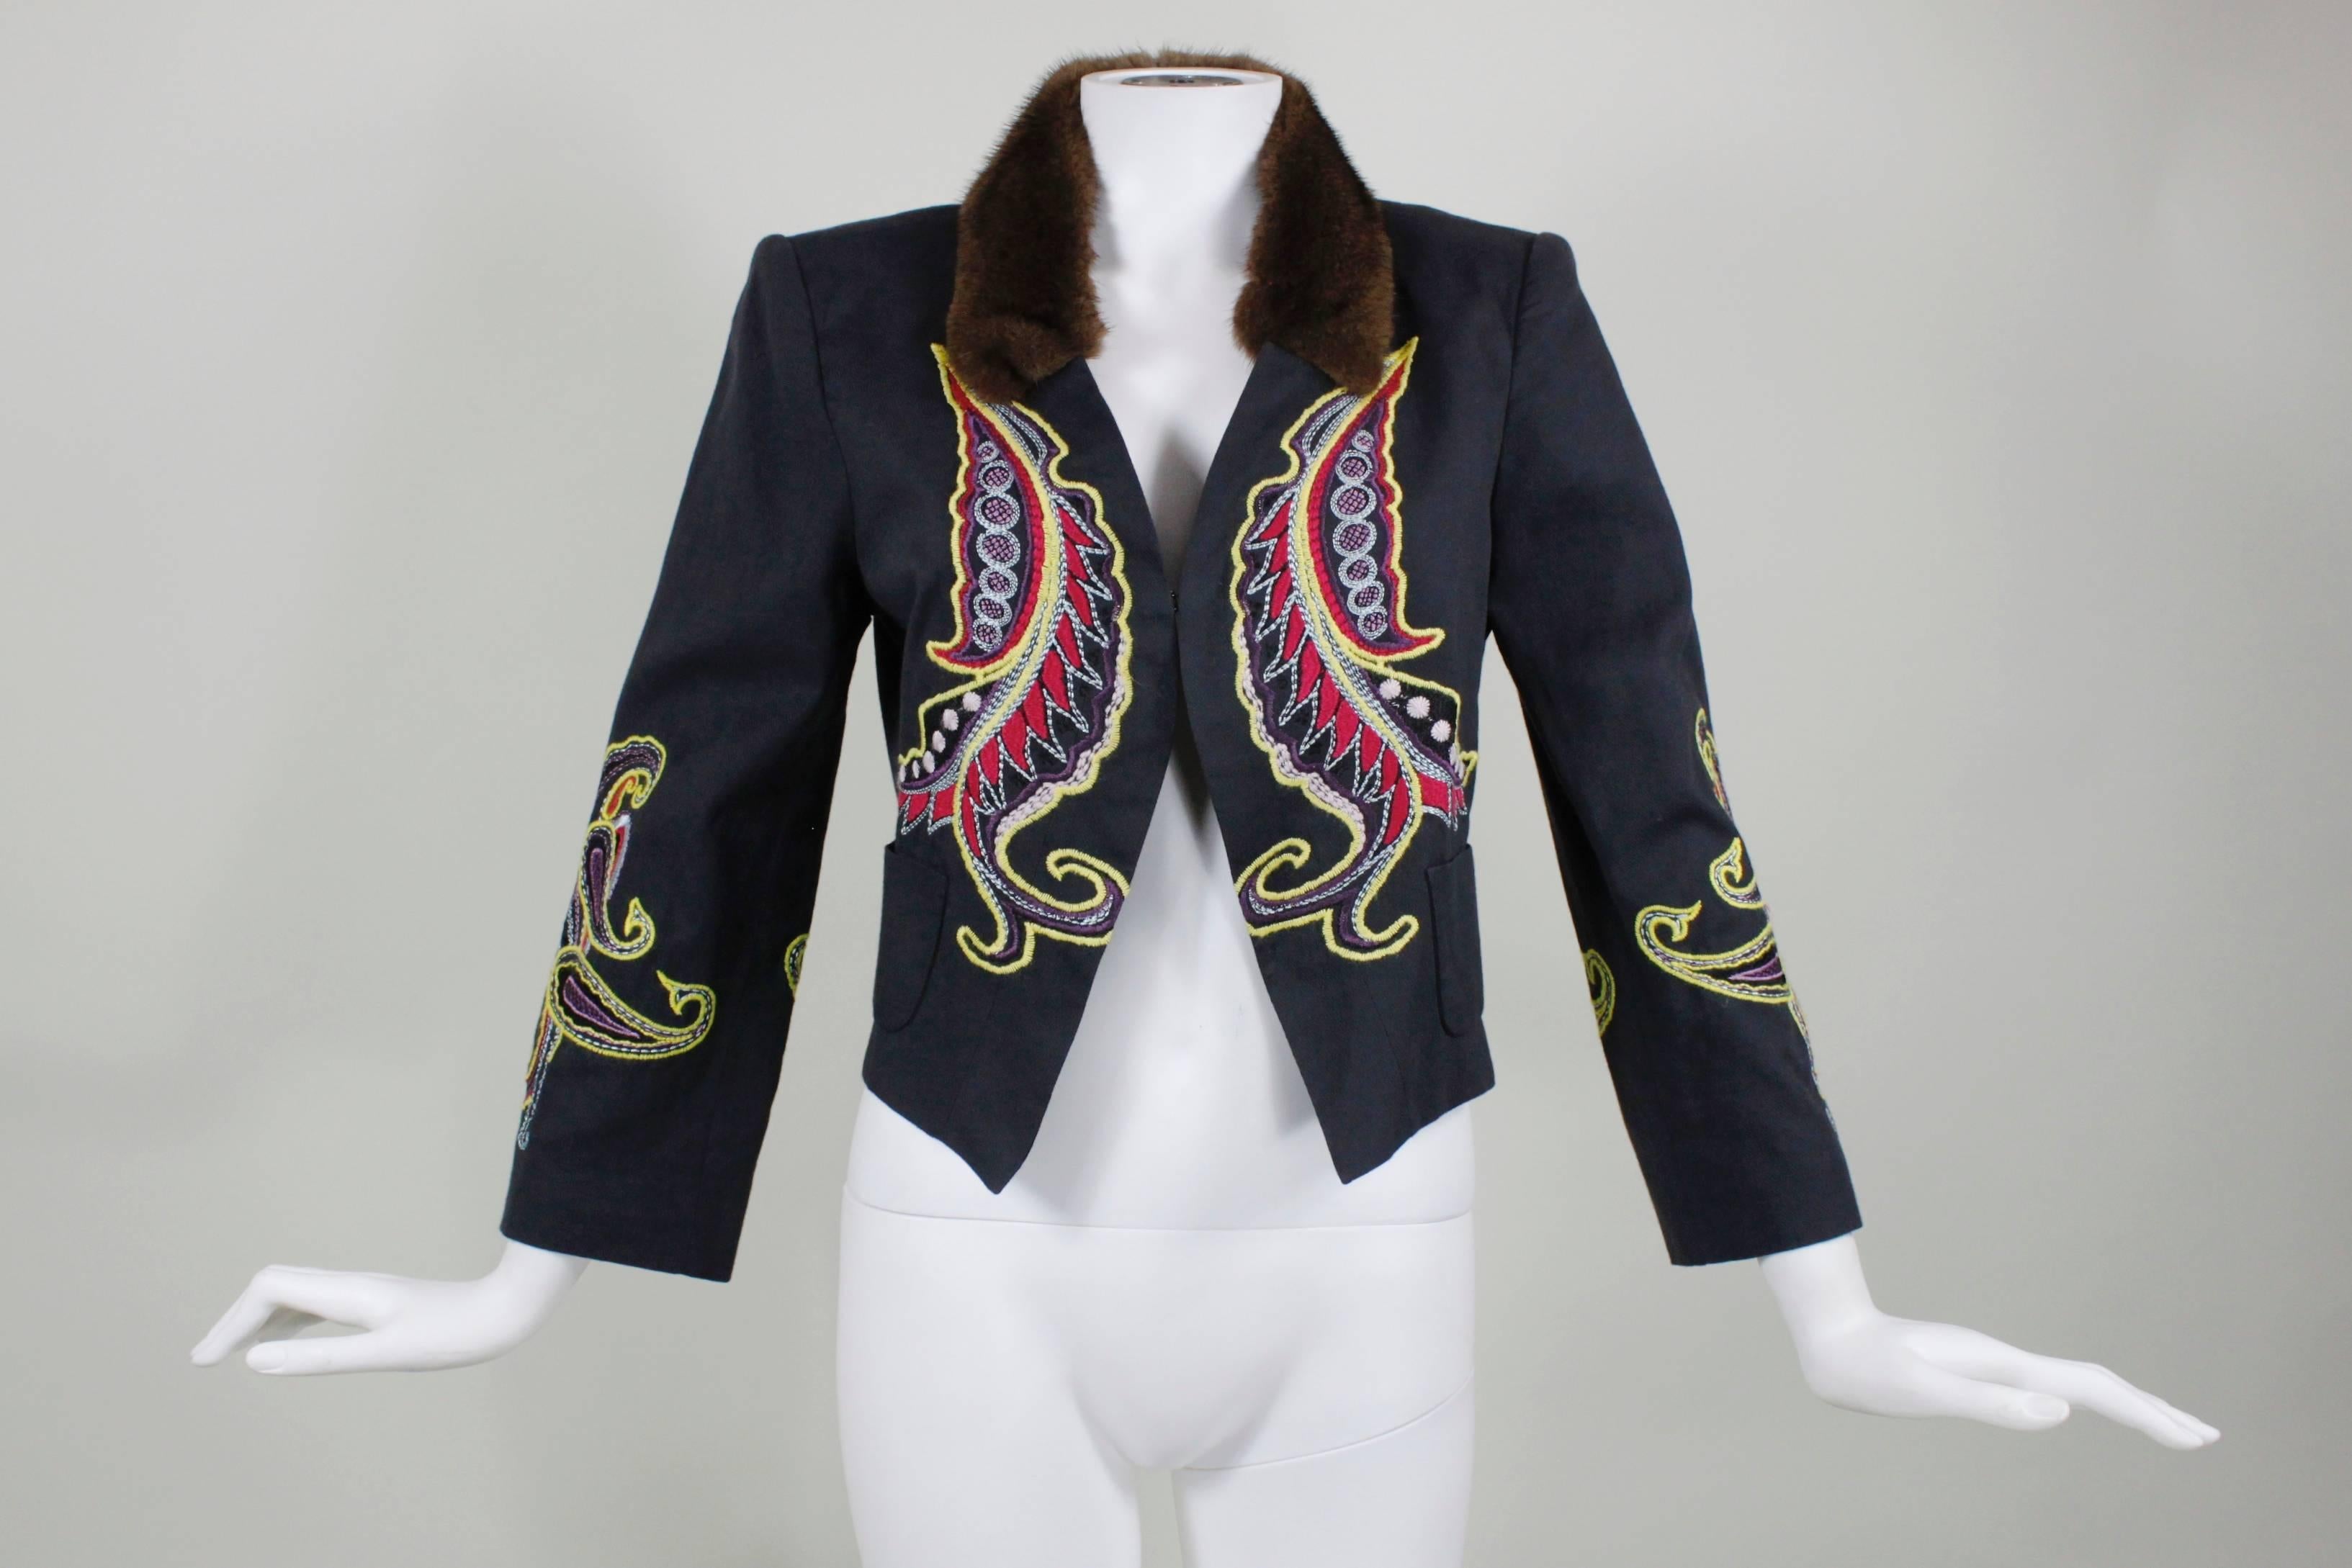 A fabulous lightweight cotton-wool jacket from Christian Lacroix. Done in dark navy blue wool, the jacket features vibrant red, yellow, and cornflower embroidery throughout. A fresh fur collar trims the jacket. Fully lined in colorful paisley